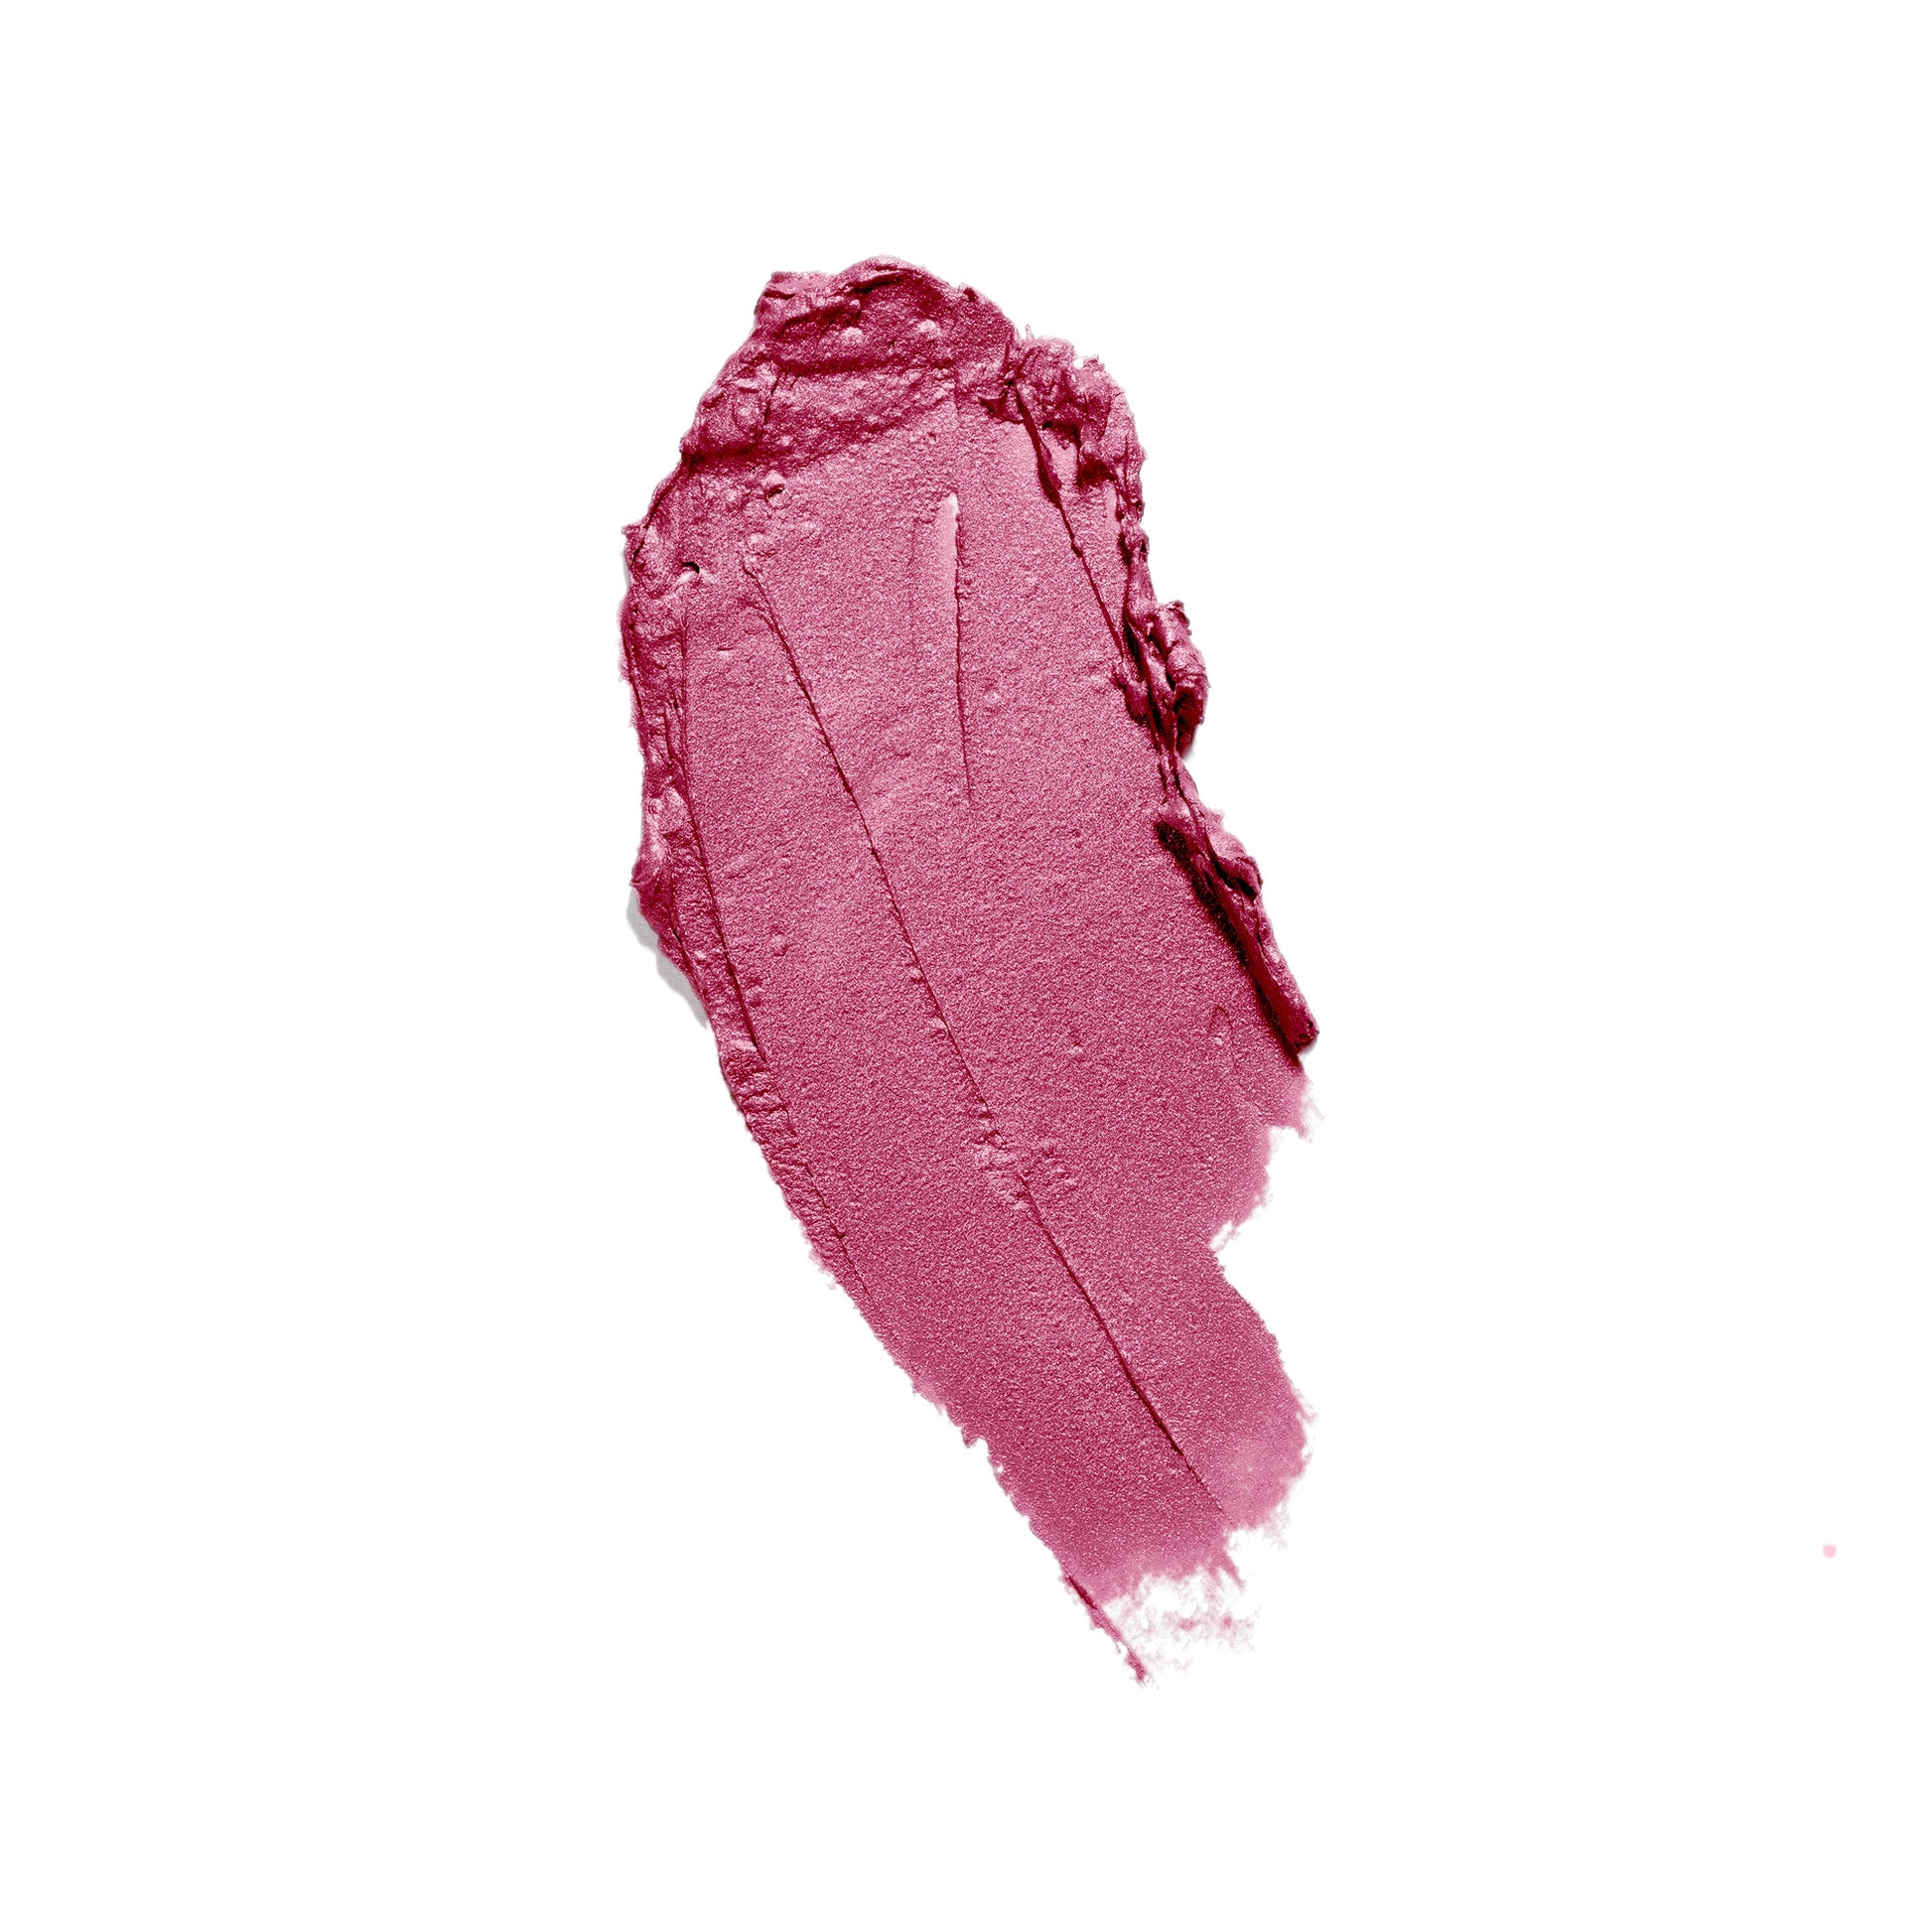 Close-up view of a Natural-Cruelty-Free satin rose lipstick against a white background